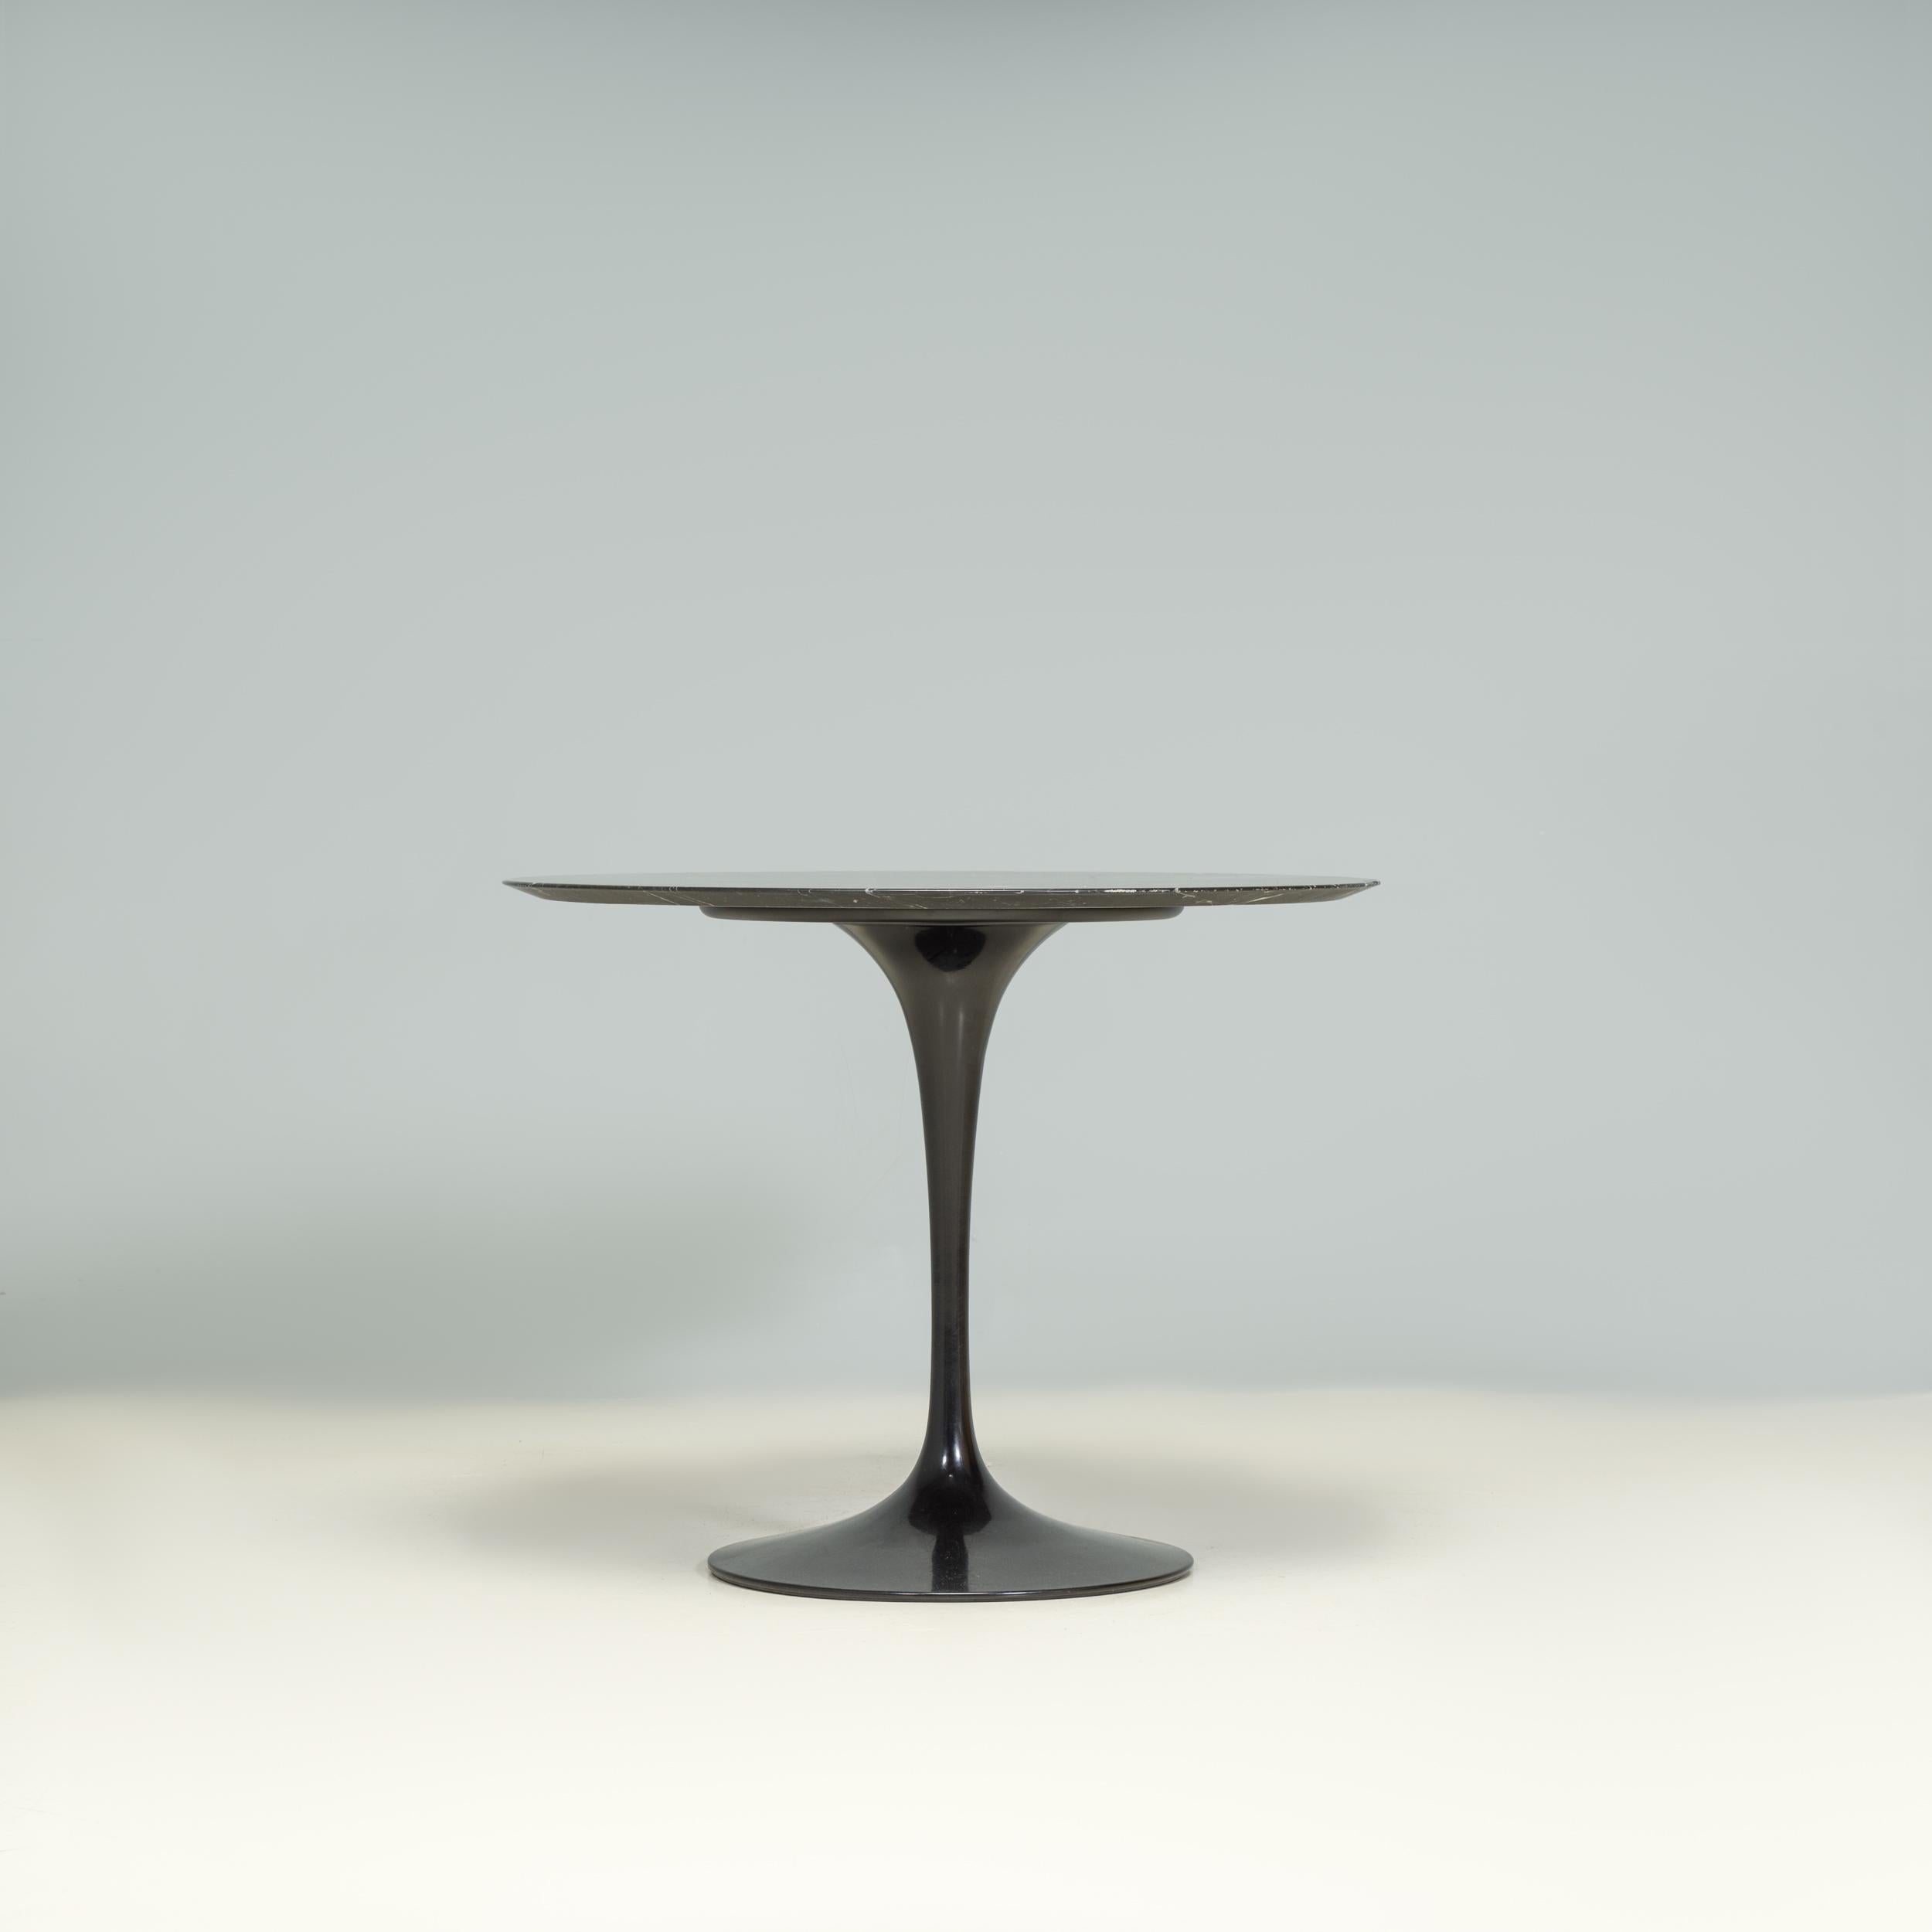 Originally designed by Eero Saarinen in 1957, the Pedestal Collection has become one of the most iconic furniture designs of the 20th century.

Taking five years to design and develop, the pedestal base was an innovative solution to table legs,